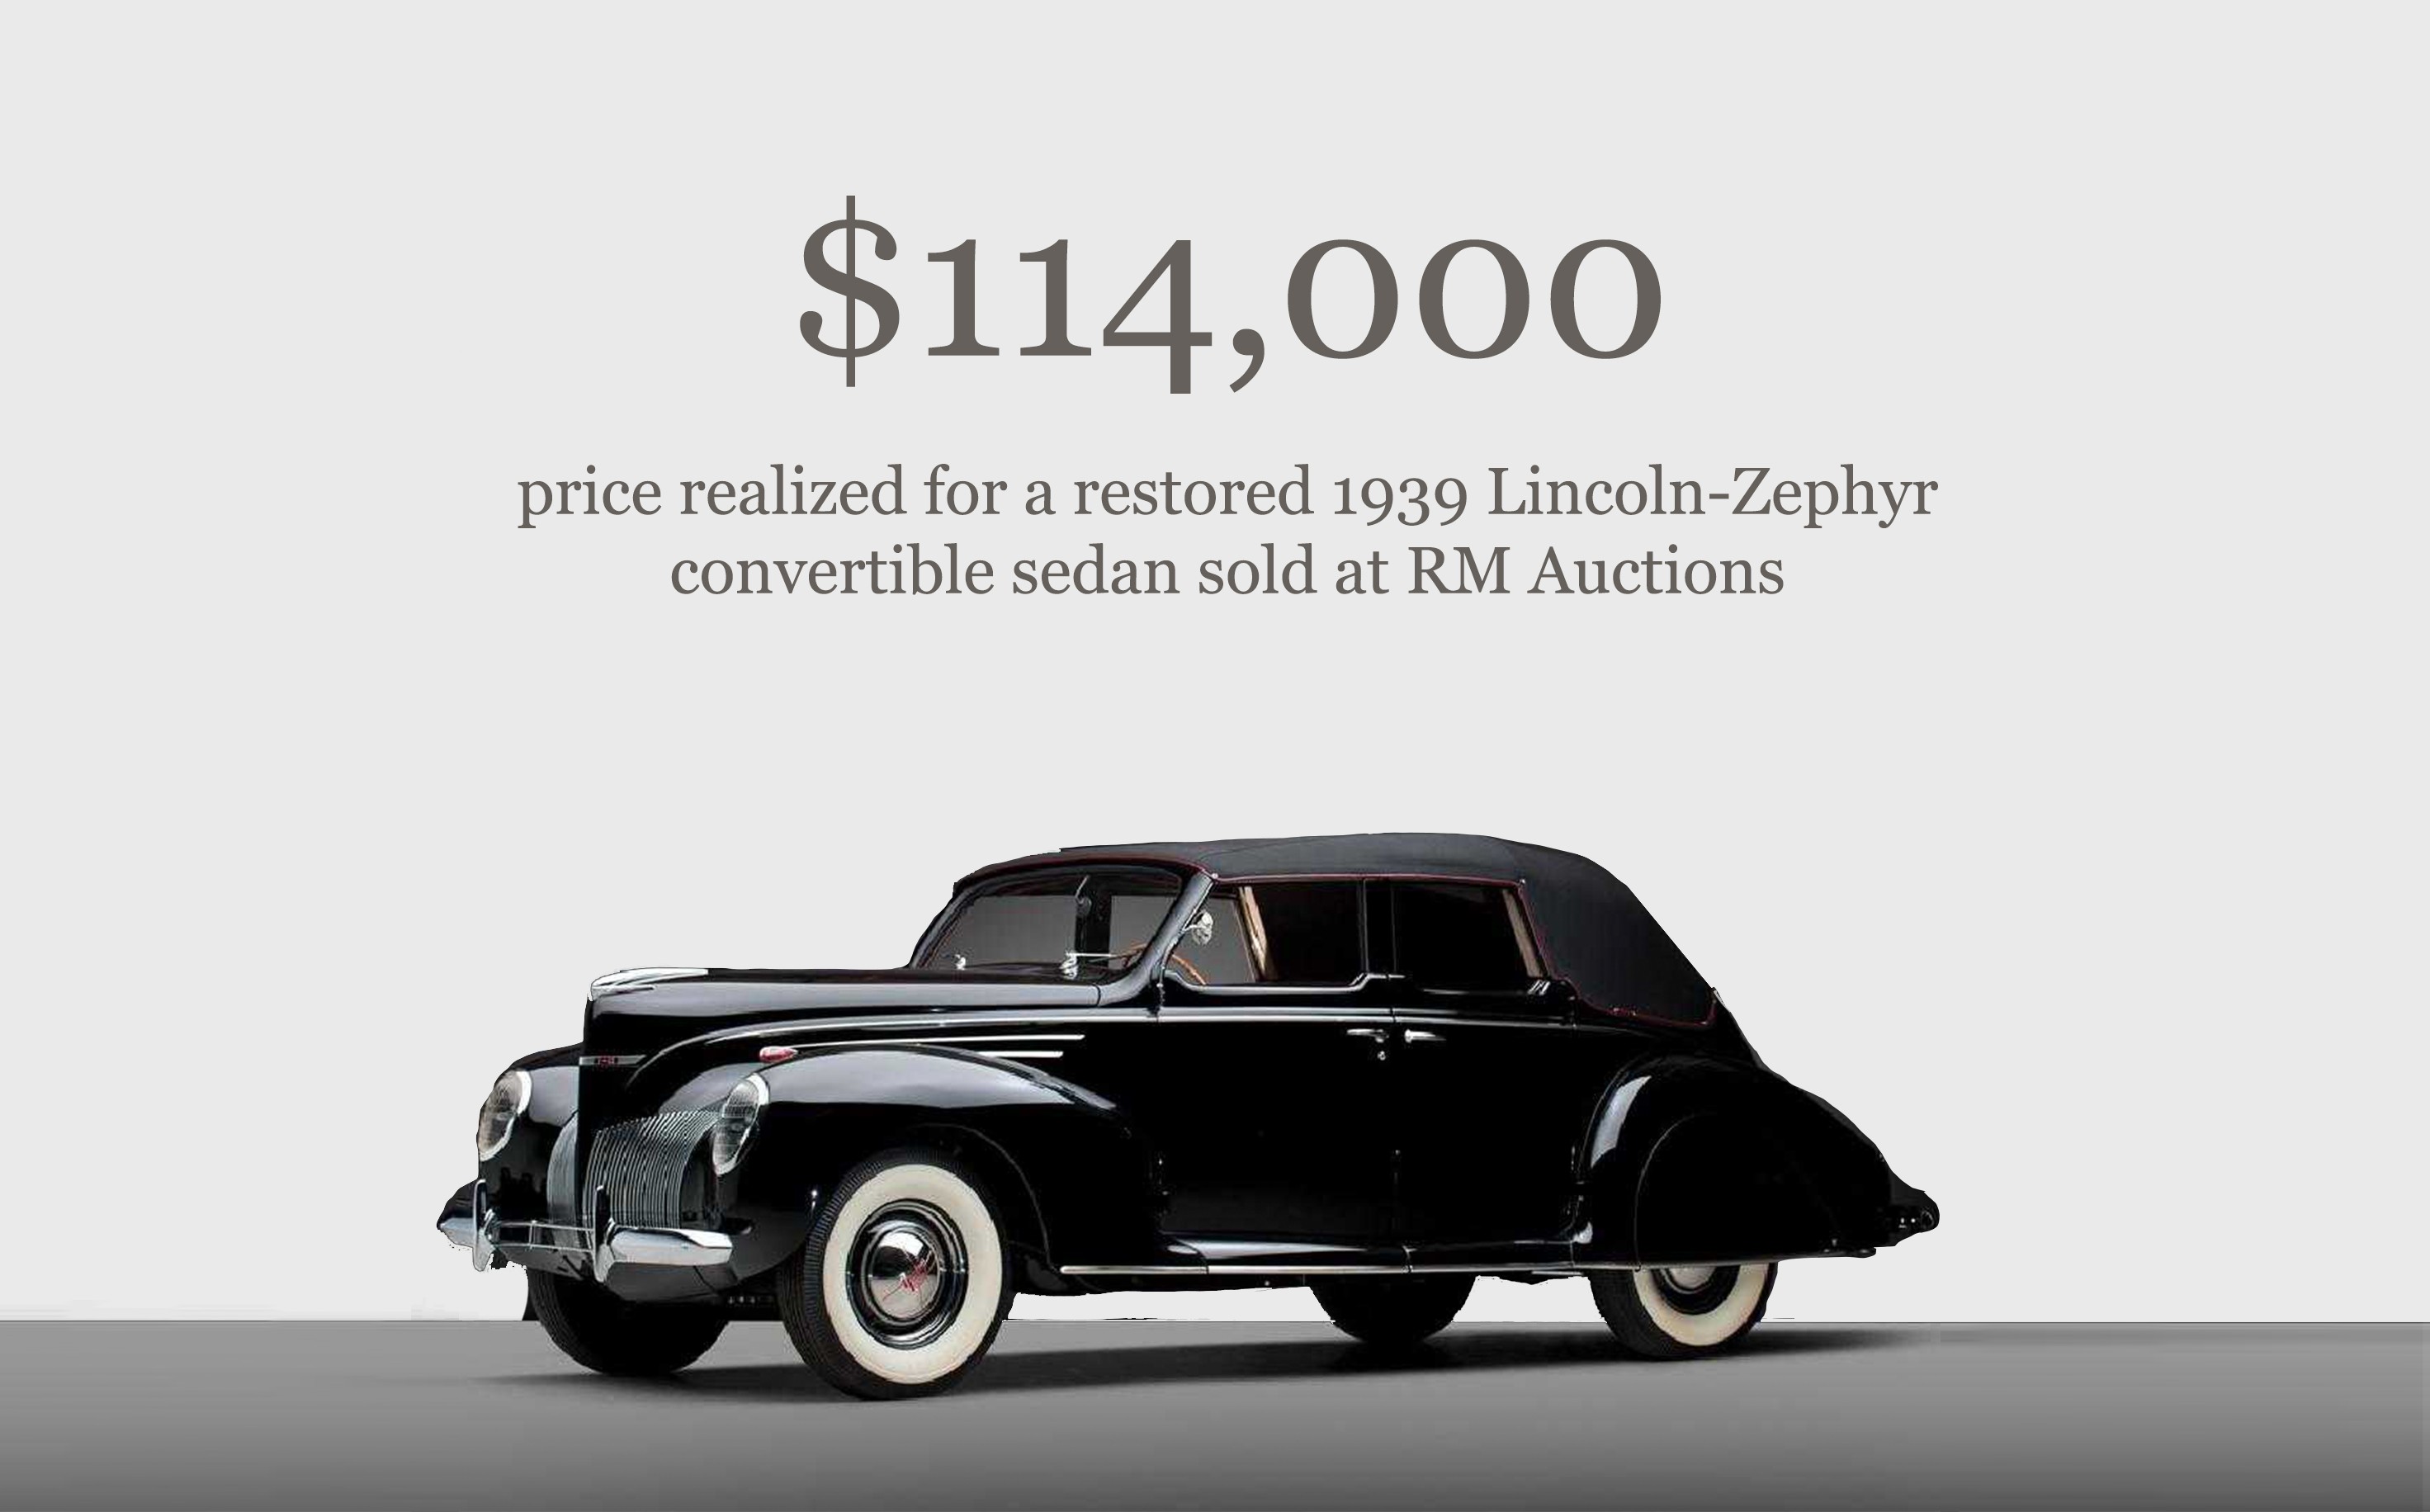 $114,000 price realized for a estored 1939 Lincoln-Zephyr convertible sedan sold at RM Auctions